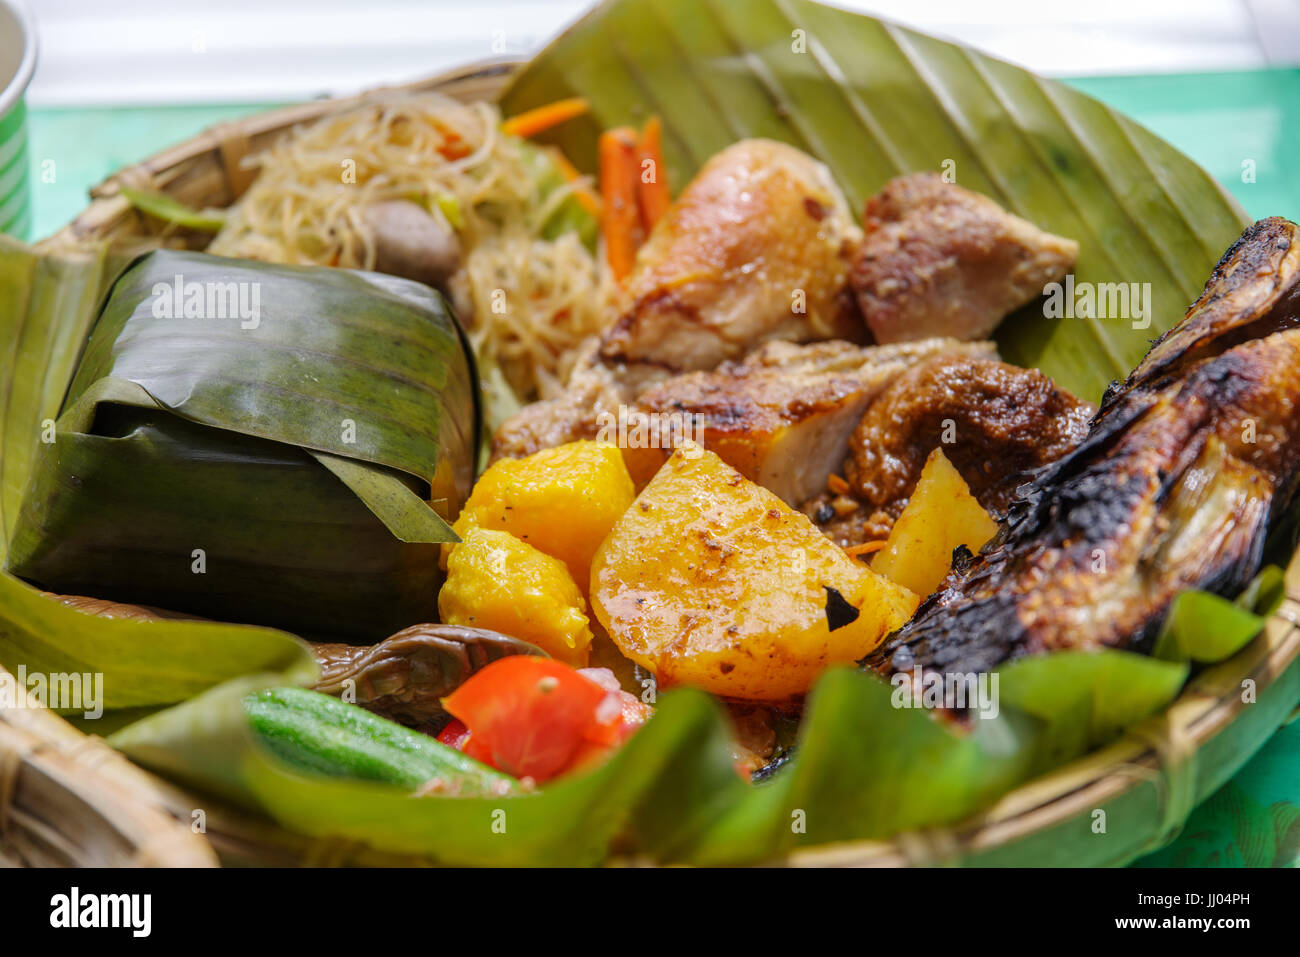 Filipino traditional set meal for Party Stock Photo